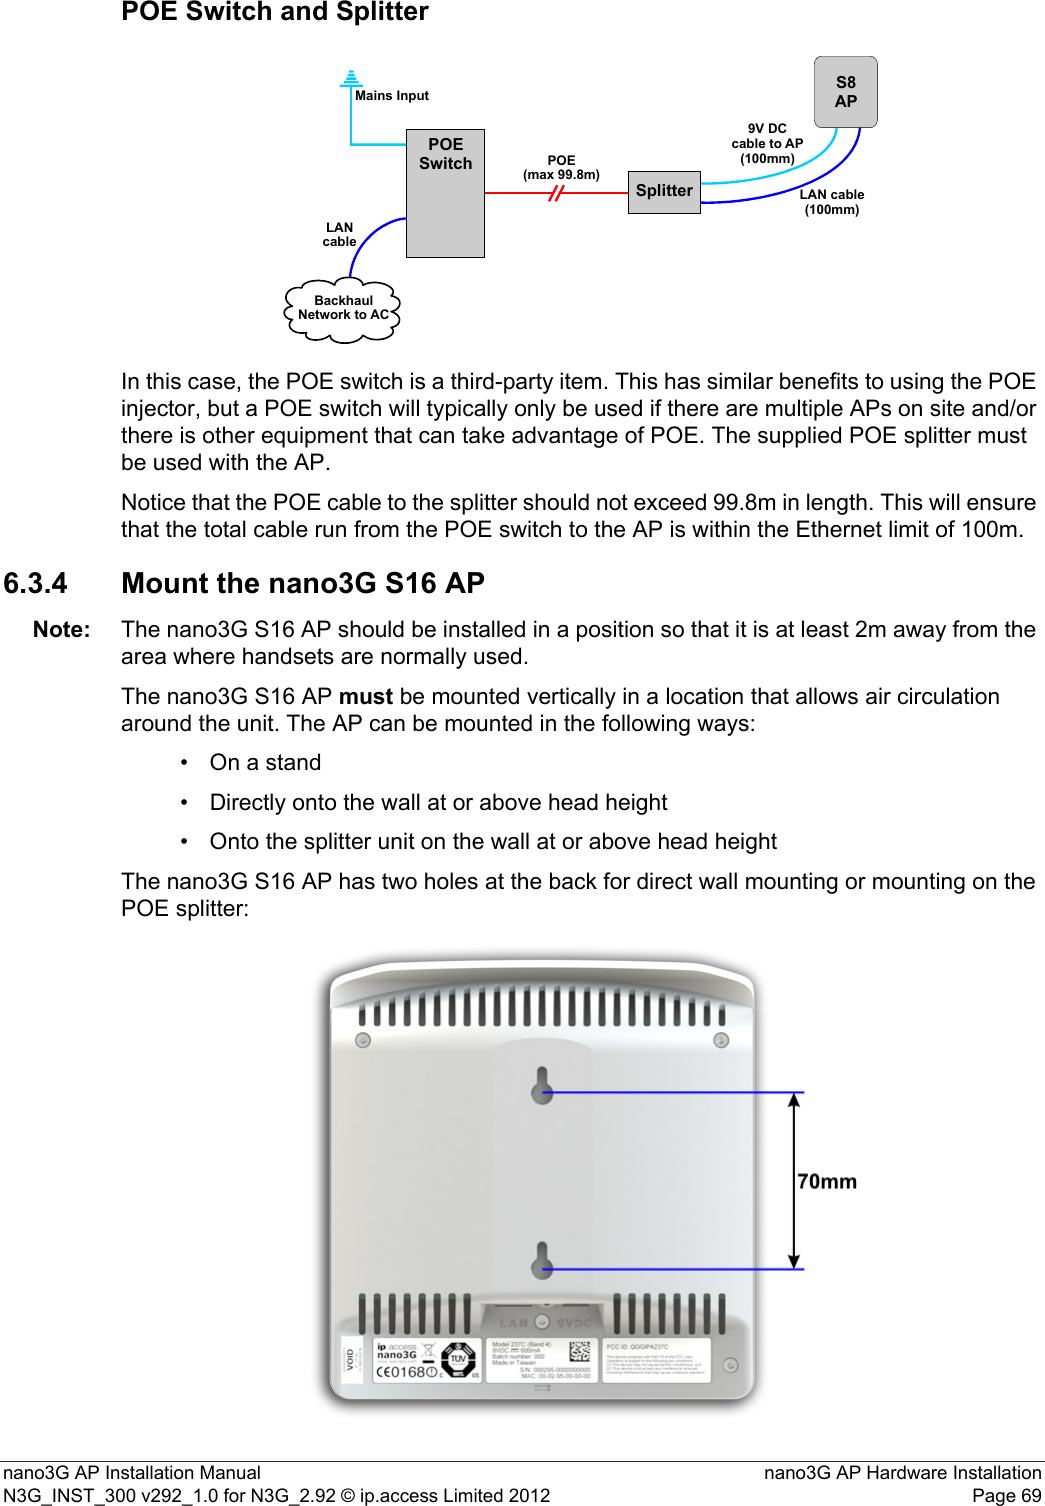 nano3G AP Installation Manual nano3G AP Hardware InstallationN3G_INST_300 v292_1.0 for N3G_2.92 © ip.access Limited 2012 Page 69POE Switch and SplitterIn this case, the POE switch is a third-party item. This has similar benefits to using the POE injector, but a POE switch will typically only be used if there are multiple APs on site and/or there is other equipment that can take advantage of POE. The supplied POE splitter must be used with the AP.Notice that the POE cable to the splitter should not exceed 99.8m in length. This will ensure that the total cable run from the POE switch to the AP is within the Ethernet limit of 100m.6.3.4 Mount the nano3G S16 APNote: The nano3G S16 AP should be installed in a position so that it is at least 2m away from the area where handsets are normally used.The nano3G S16 AP must be mounted vertically in a location that allows air circulation around the unit. The AP can be mounted in the following ways:• On a stand• Directly onto the wall at or above head height• Onto the splitter unit on the wall at or above head heightThe nano3G S16 AP has two holes at the back for direct wall mounting or mounting on the POE splitter:SplitterPOESwitchS8APPOE(max 99.8m)Mains InputLANcableBackhaulNetwork to AC9V DCcable to AP(100mm)LAN cable(100mm)